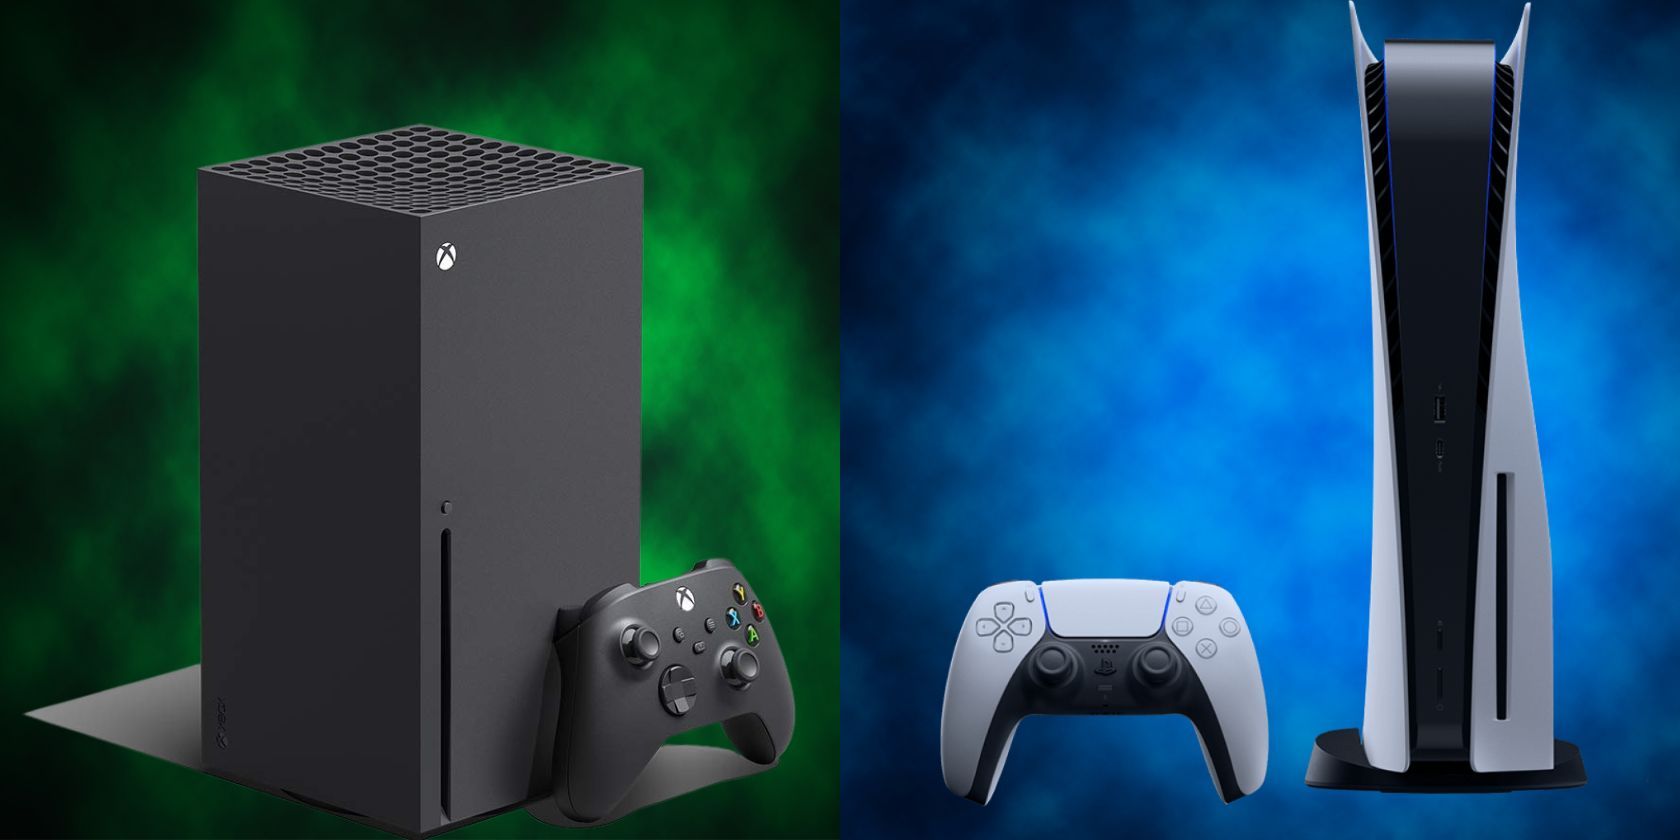 PS5 vs Xbox series X: Which console is better?